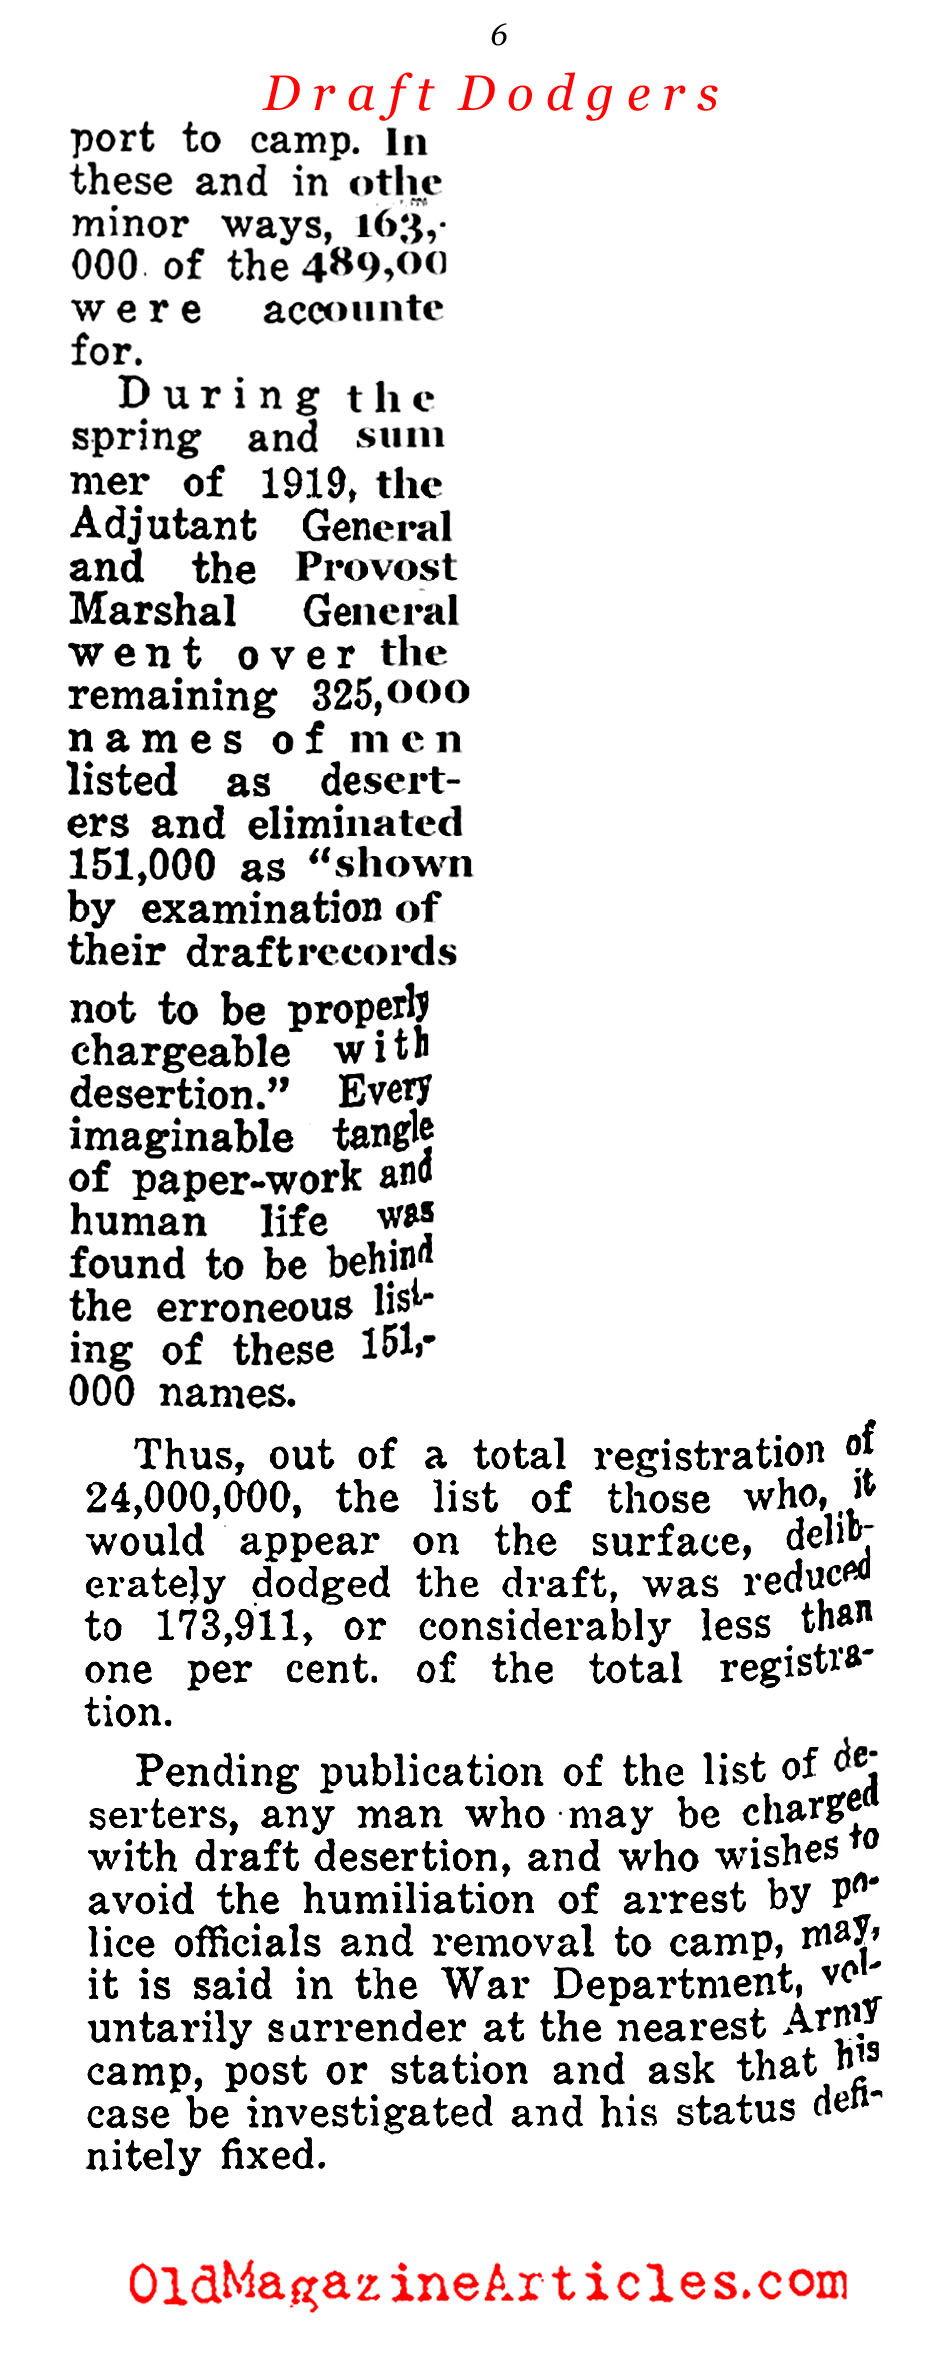 Crack of Doom for the Draft Dodgers (American Legion Weekly, 1920)